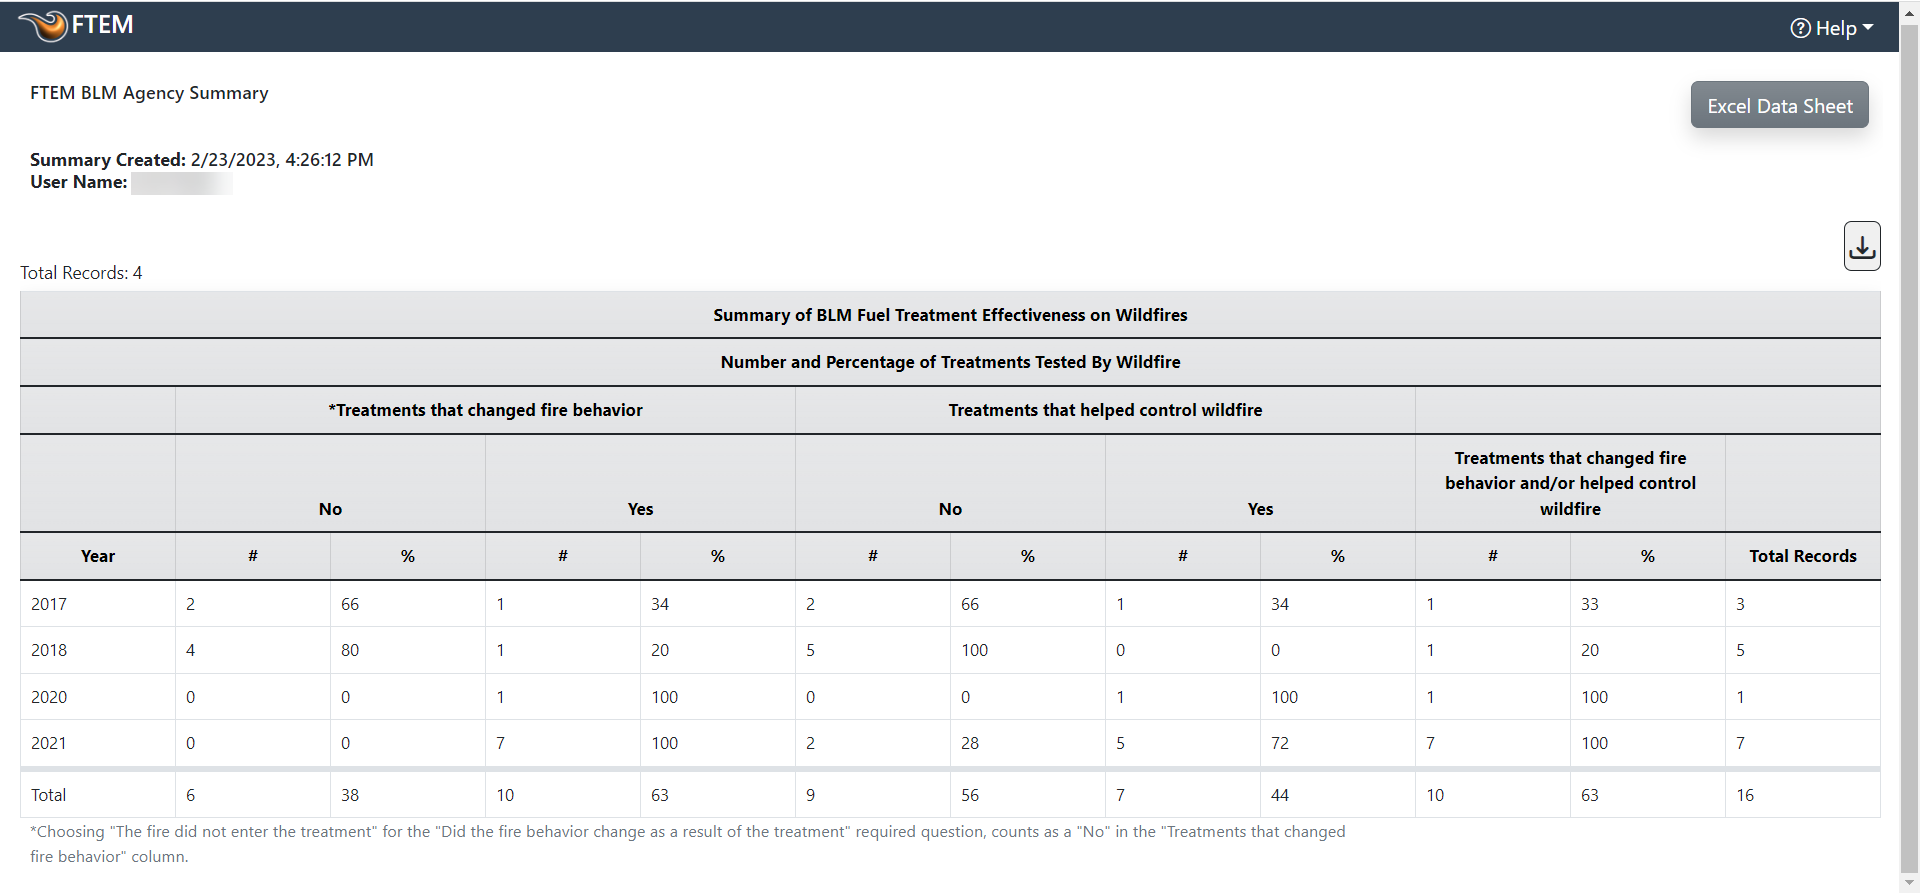 ftem agency summary showing data in table format.